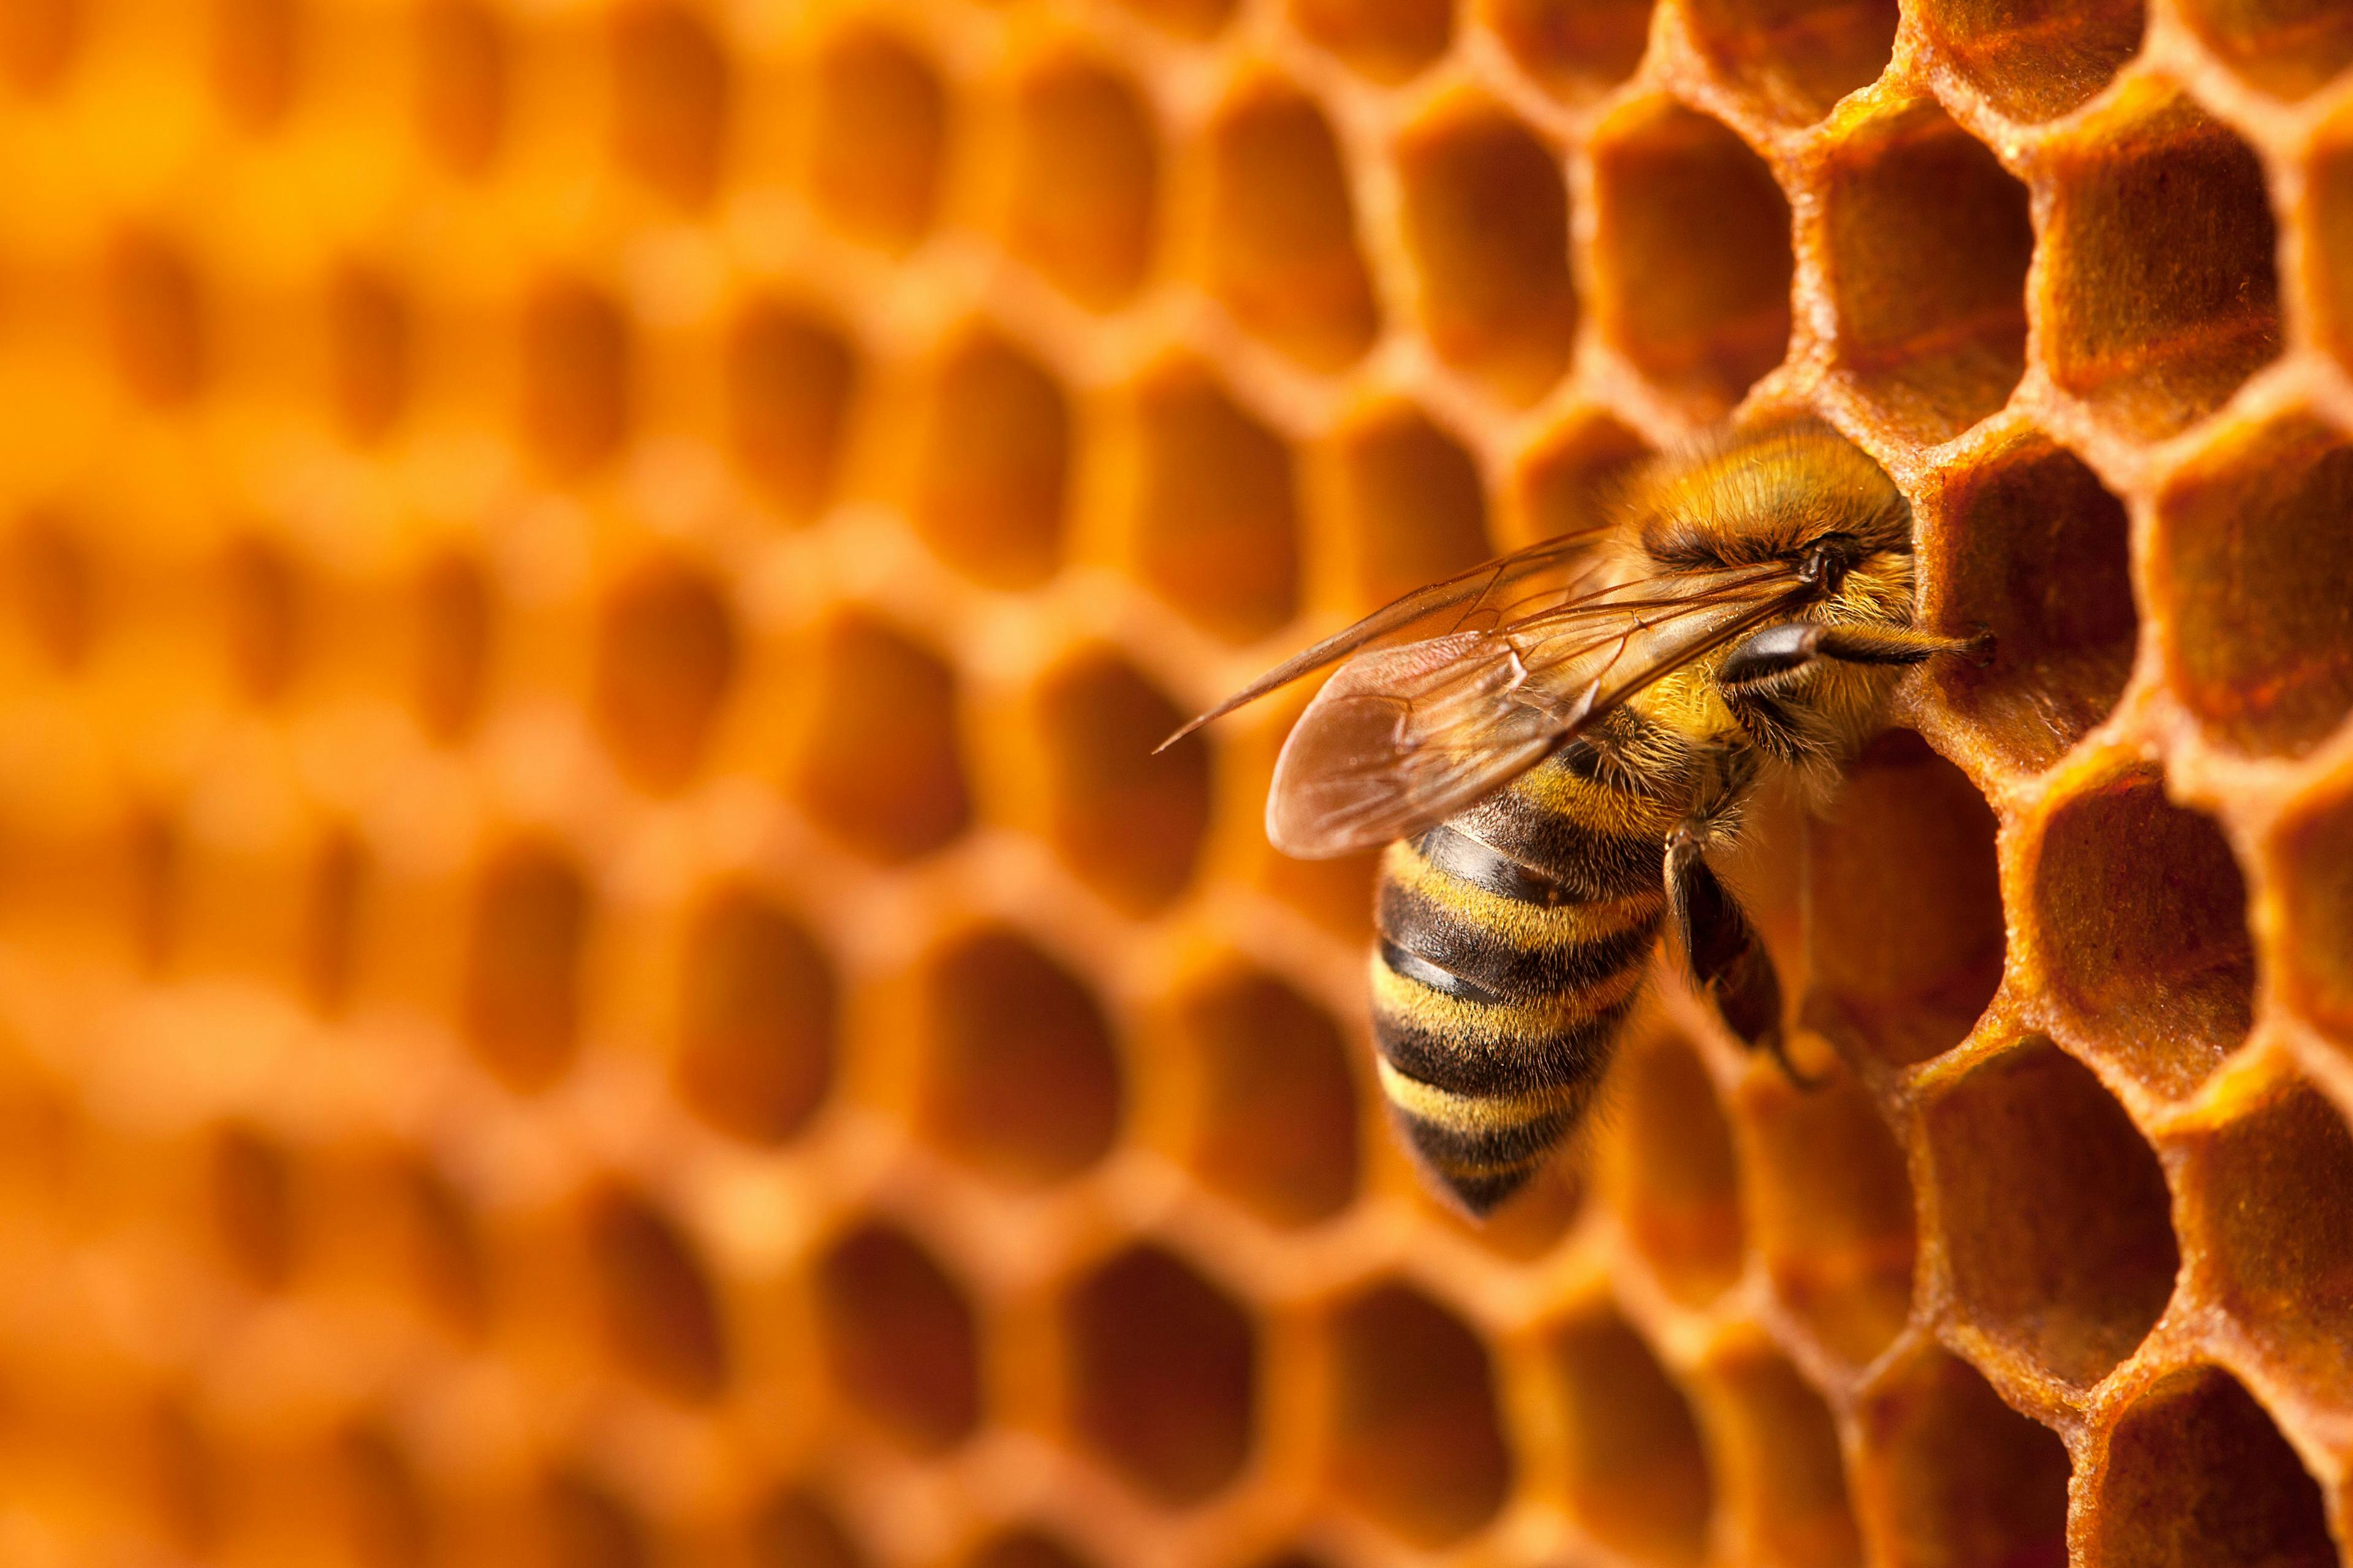 Can an essential oil save honeybees?